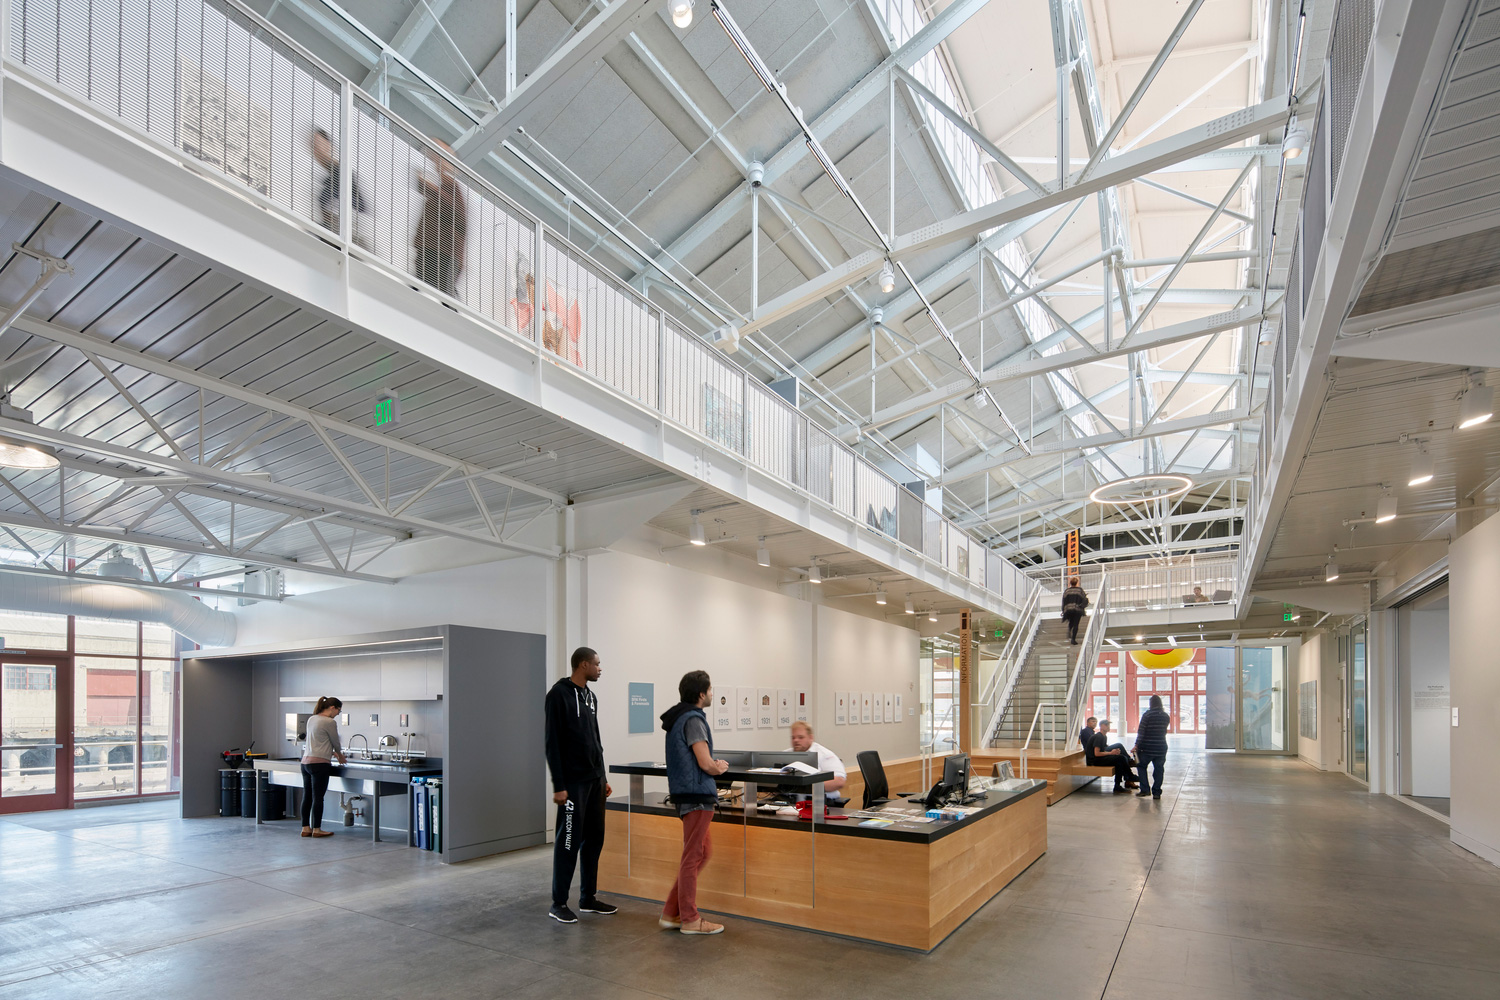 Interior of a converted warehouse with exposed trusses, now a building for the San Francisco Art Institute